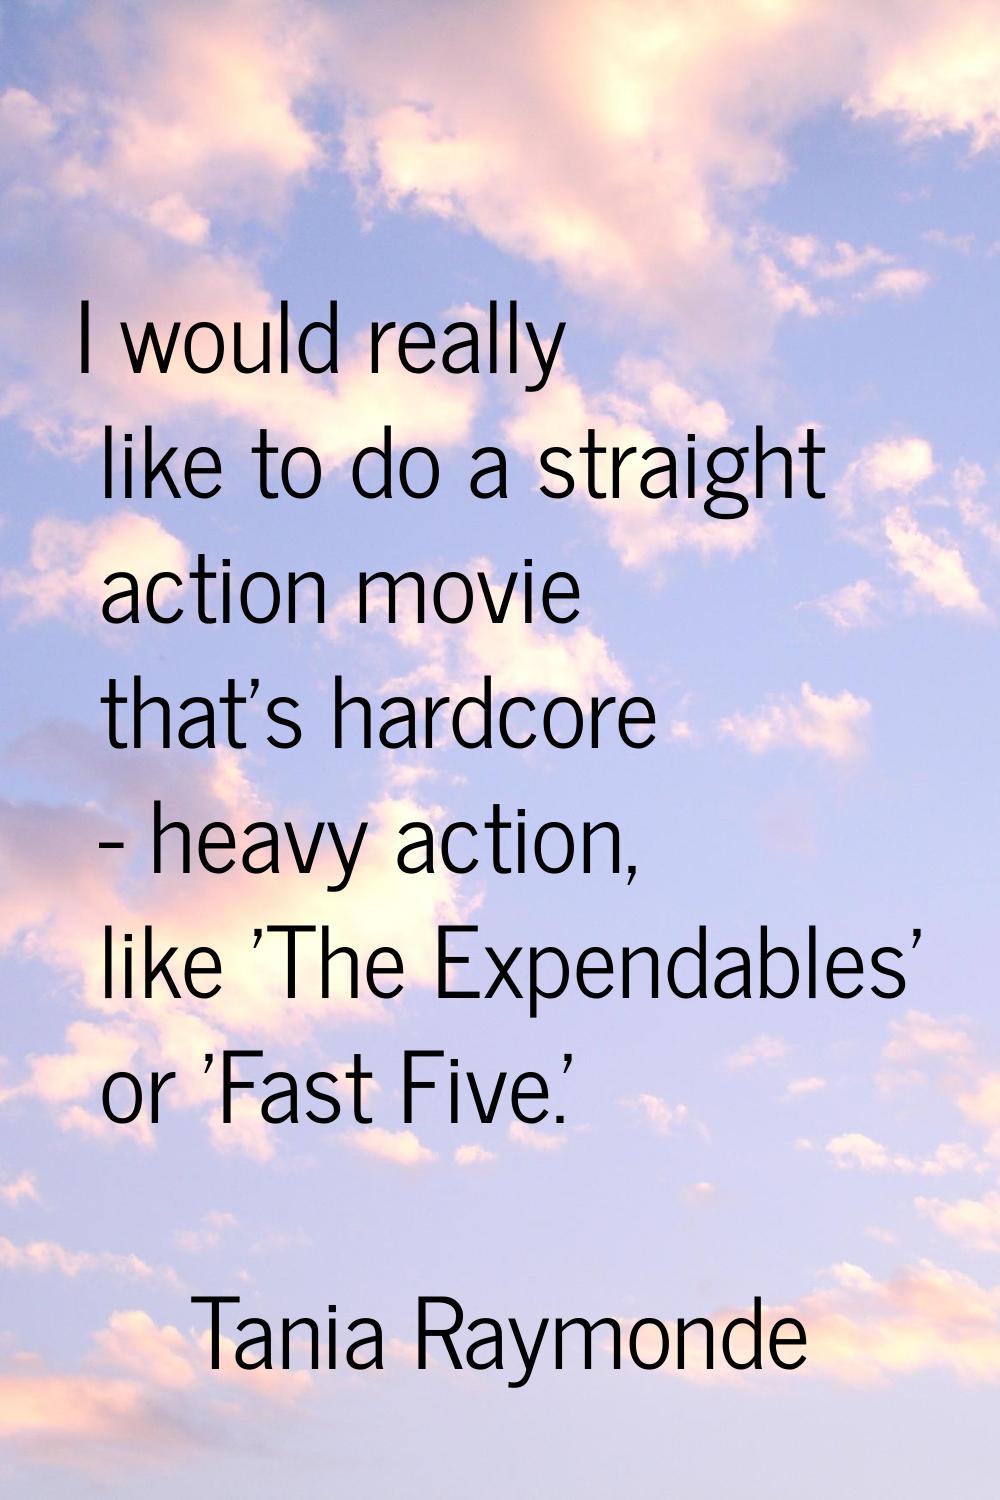 I would really like to do a straight action movie that's hardcore - heavy action, like 'The Expenda